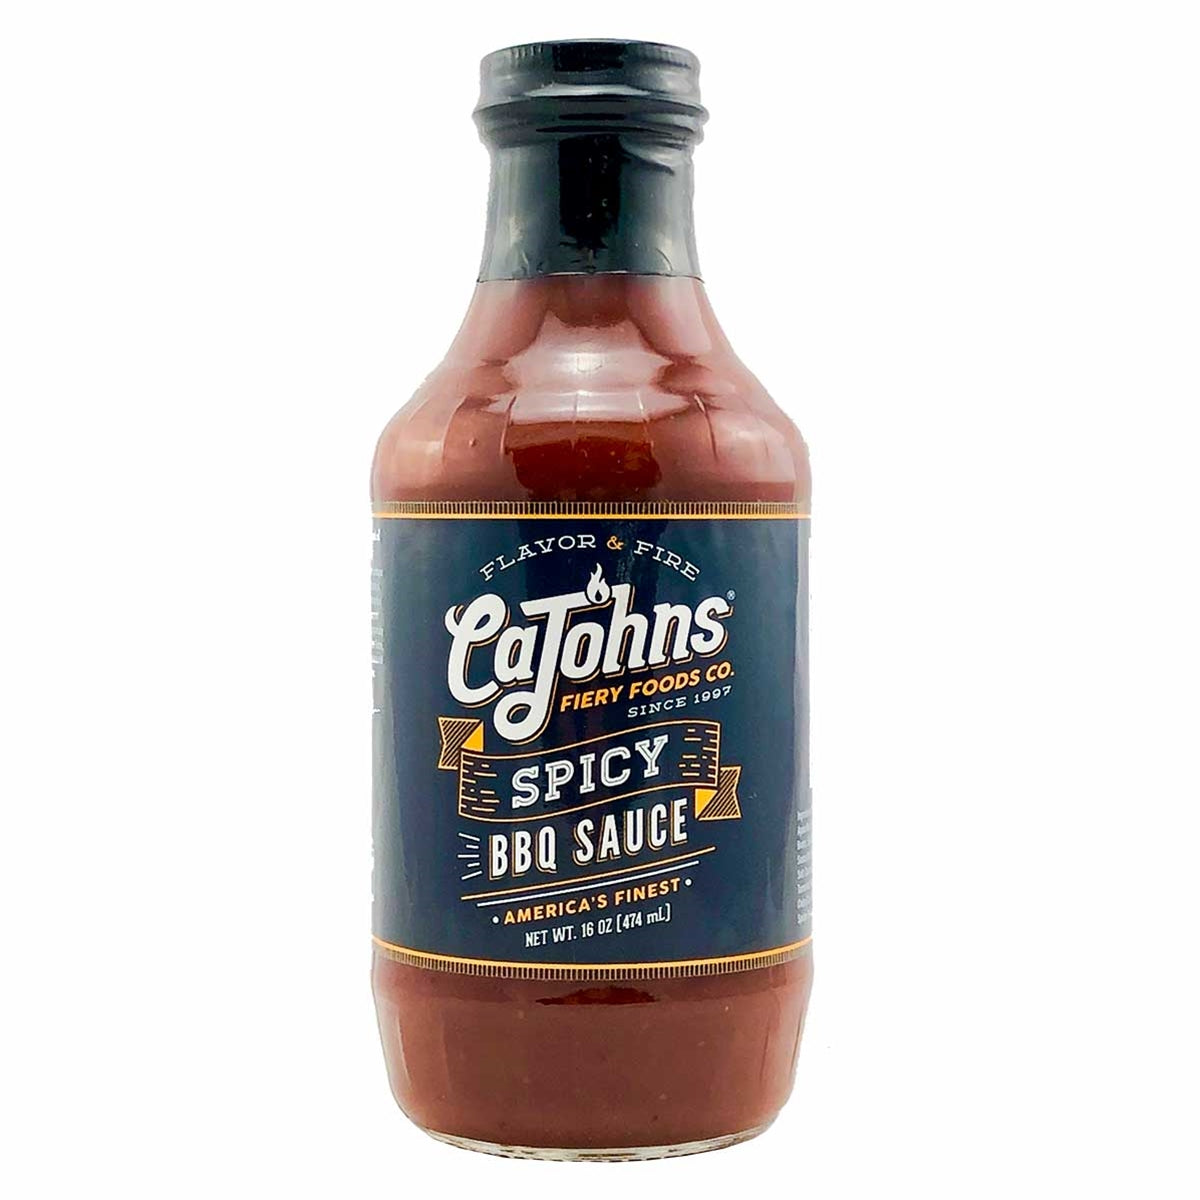 Cajohn's Spicy Barbecue Sauce